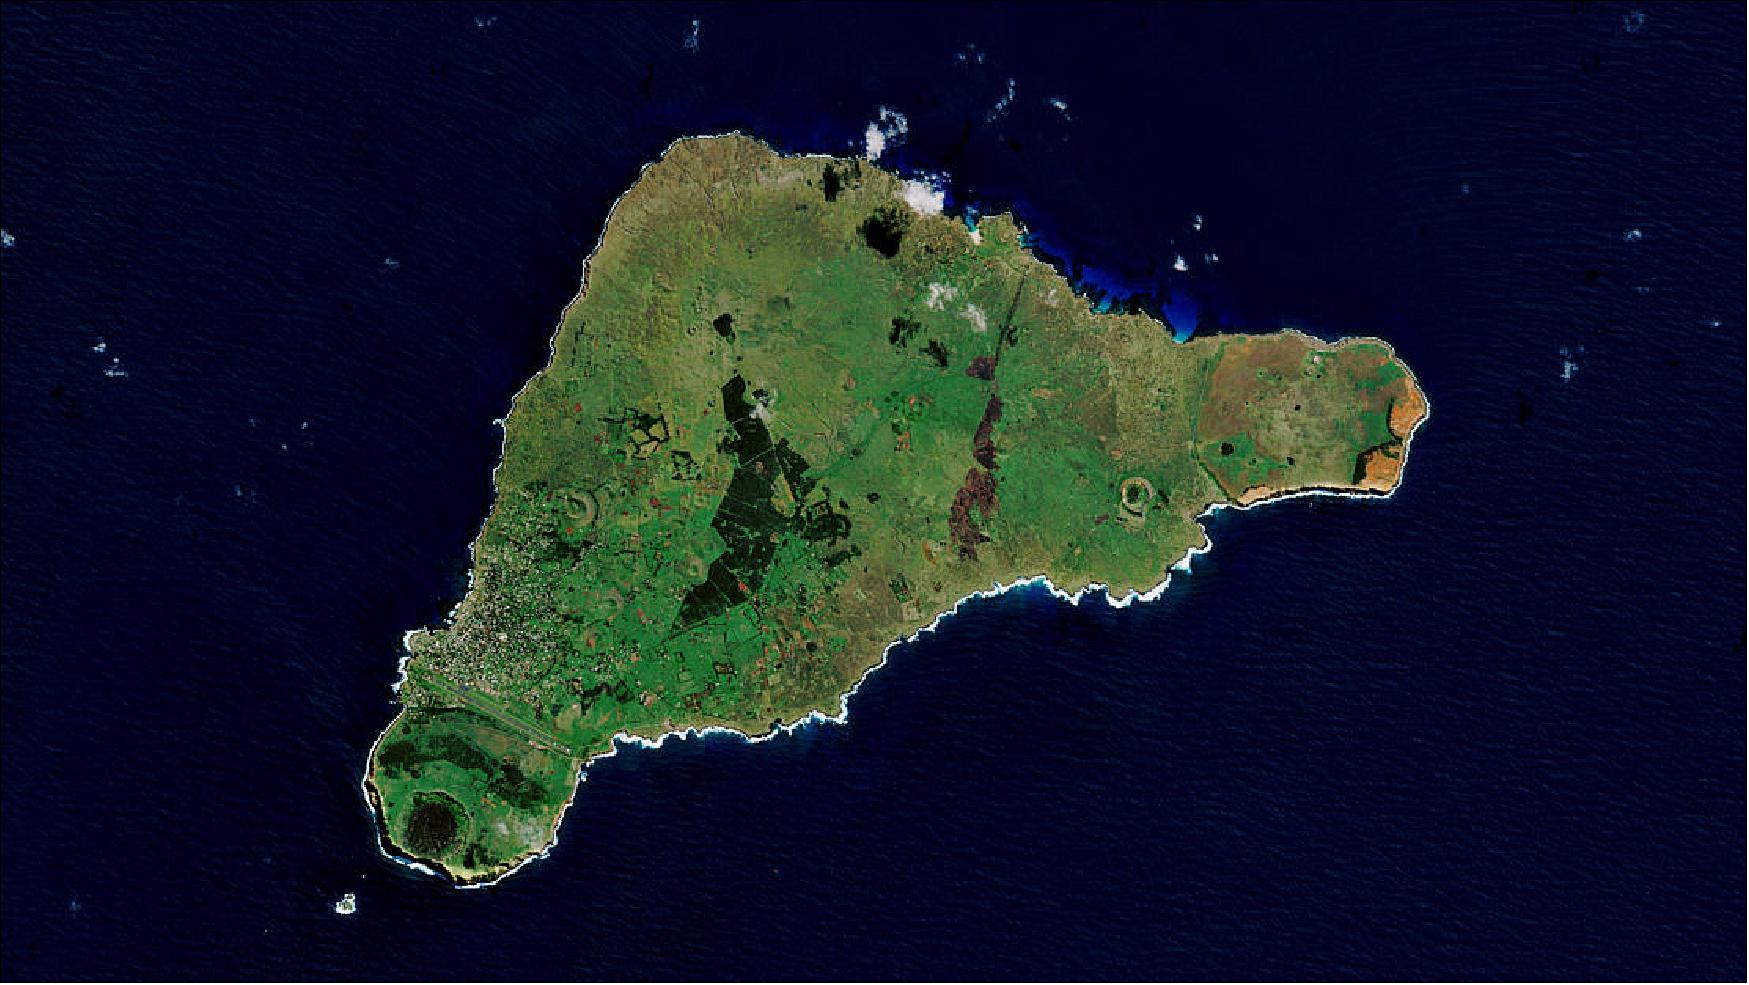 Figure 36: Easter Island, with a size of 163.6 km2 and a population of 7500, is a Chilean island in the southeastern Pacific Ocean, at the south-easternmost point of the Polynesian Triangle in Oceania. A Sentinel-2 acquired this image on 7 April 2019, it is also featured on the Earth from Space video program (image credit: ESA, the image contains modified Copernicus Sentinel data (2019), processed by ESA, CC BY-SA 3.0 IGO)